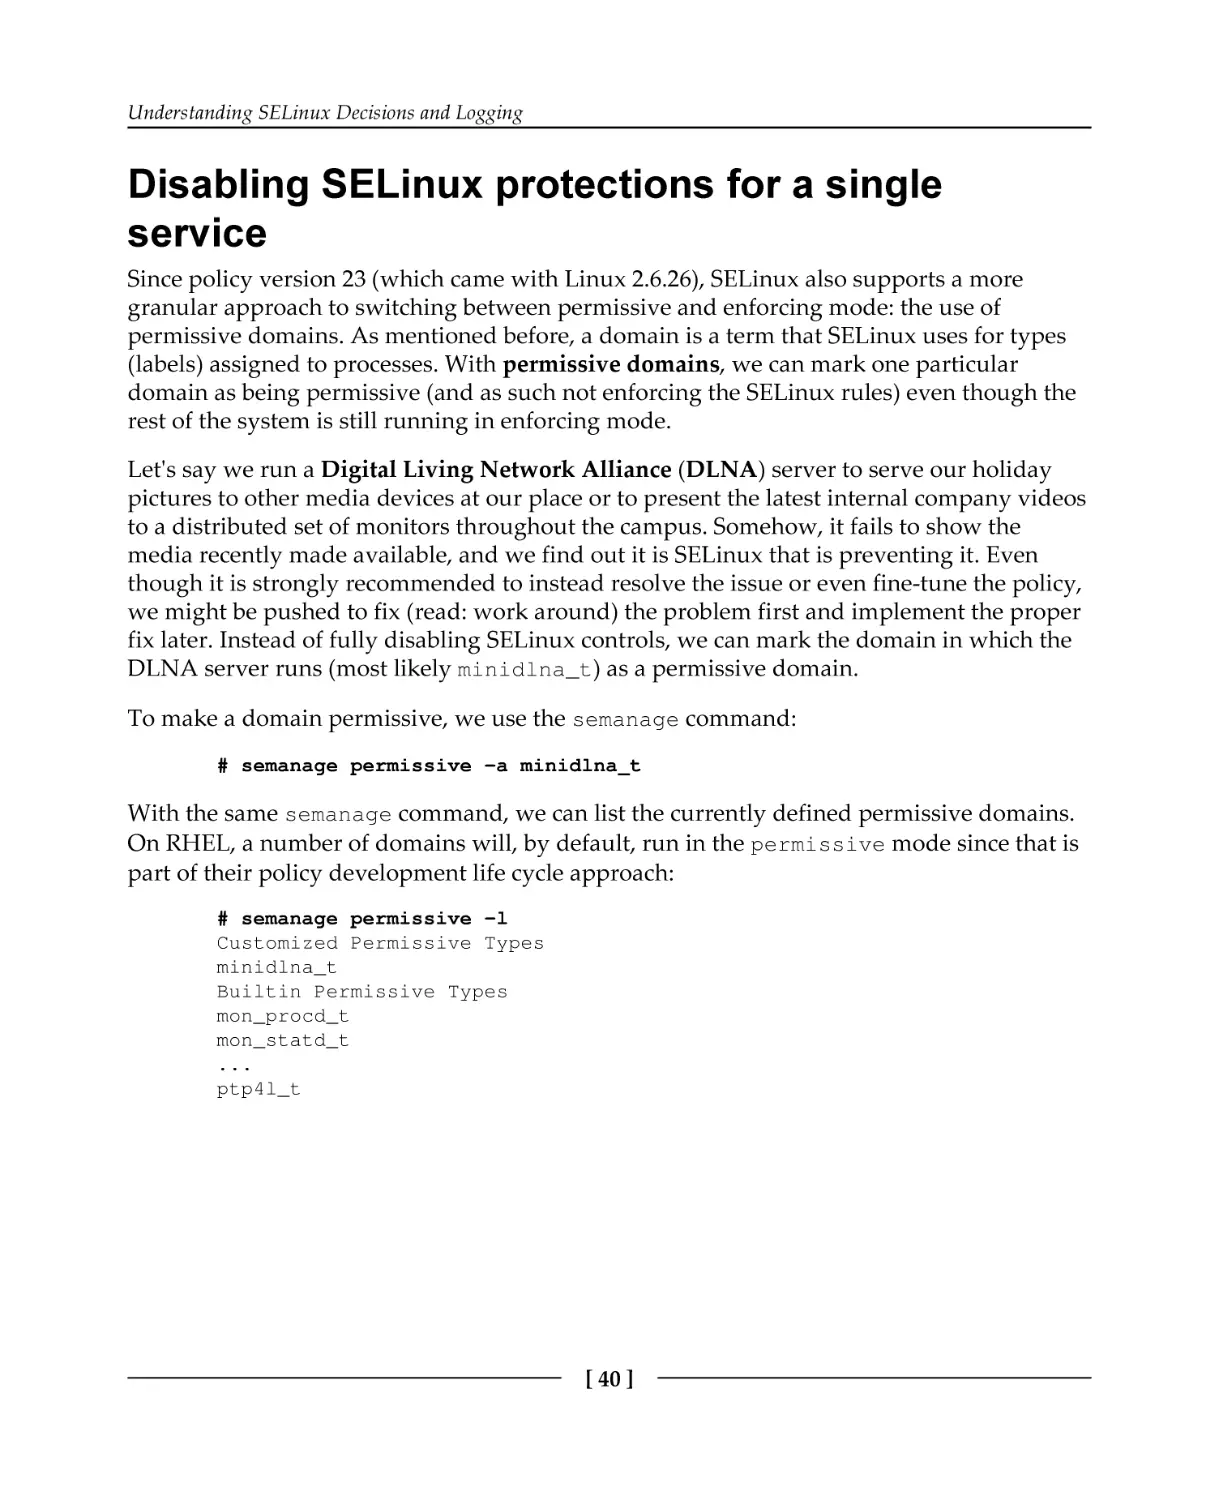 Disabling SELinux protections for a single service